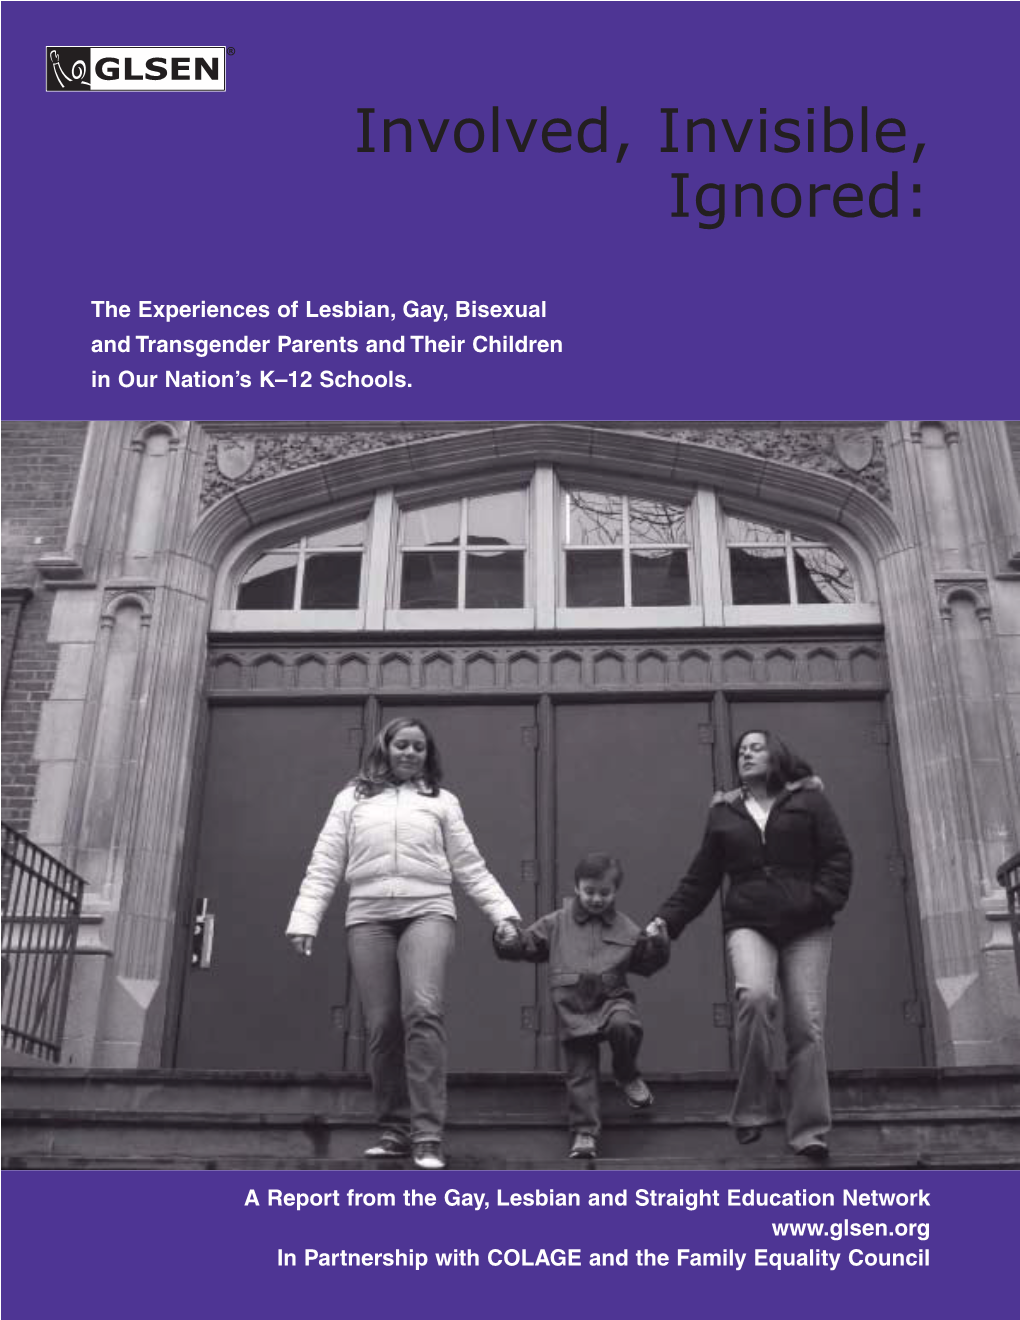 Involved, Invisible, Ignored: the Experiences of Lesbian, Gay, Bisexual and Transgender Parents and Their Children in Our Nation's K–12 Schools